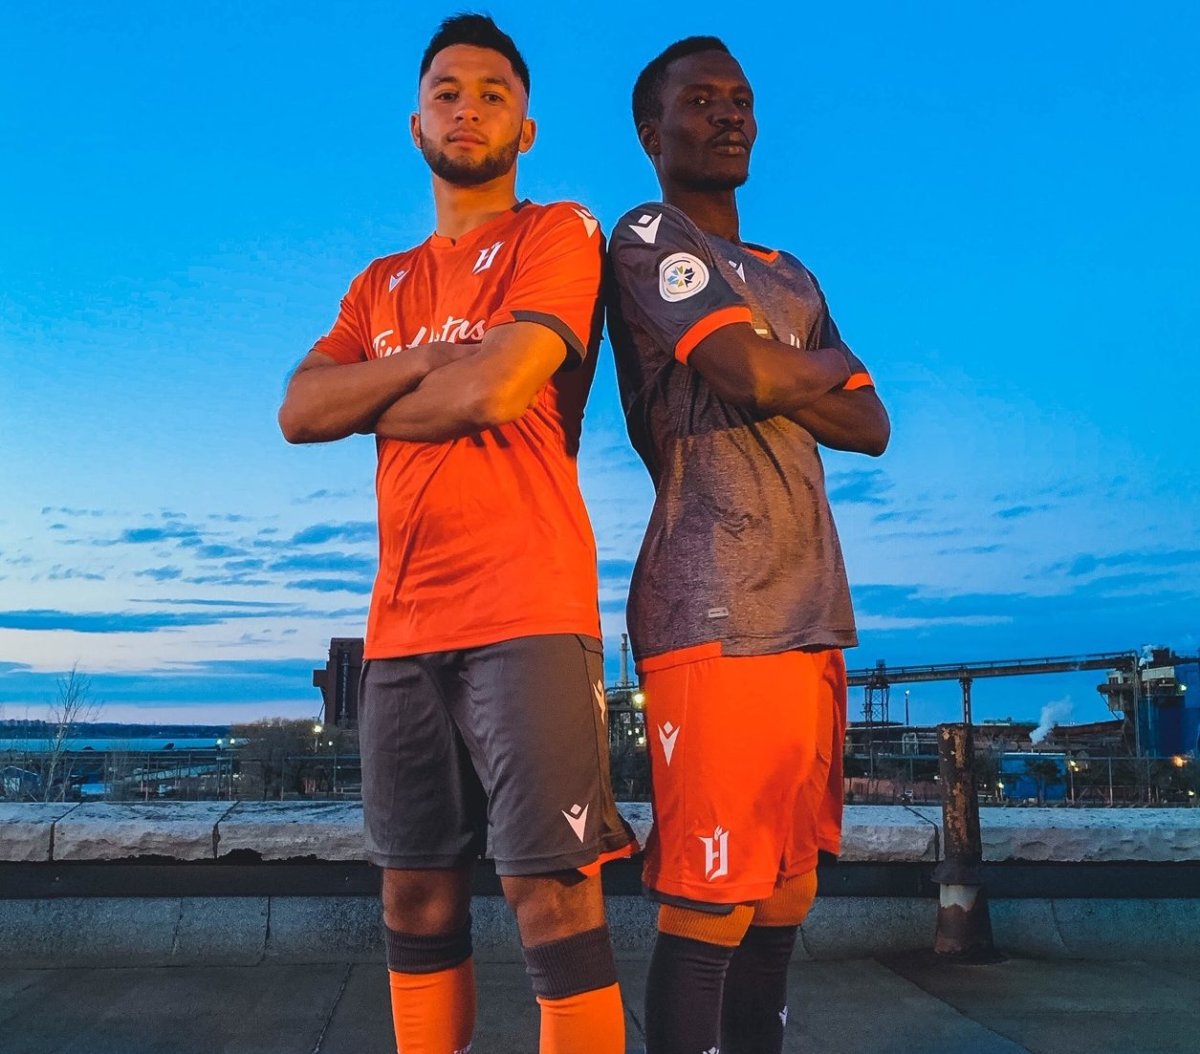 Forge FC players David Choiniere (left) and Elimane Cissé (right) show off the club's home (right) and away (left) kits ahead of the inaugural Canadian Premier League season.